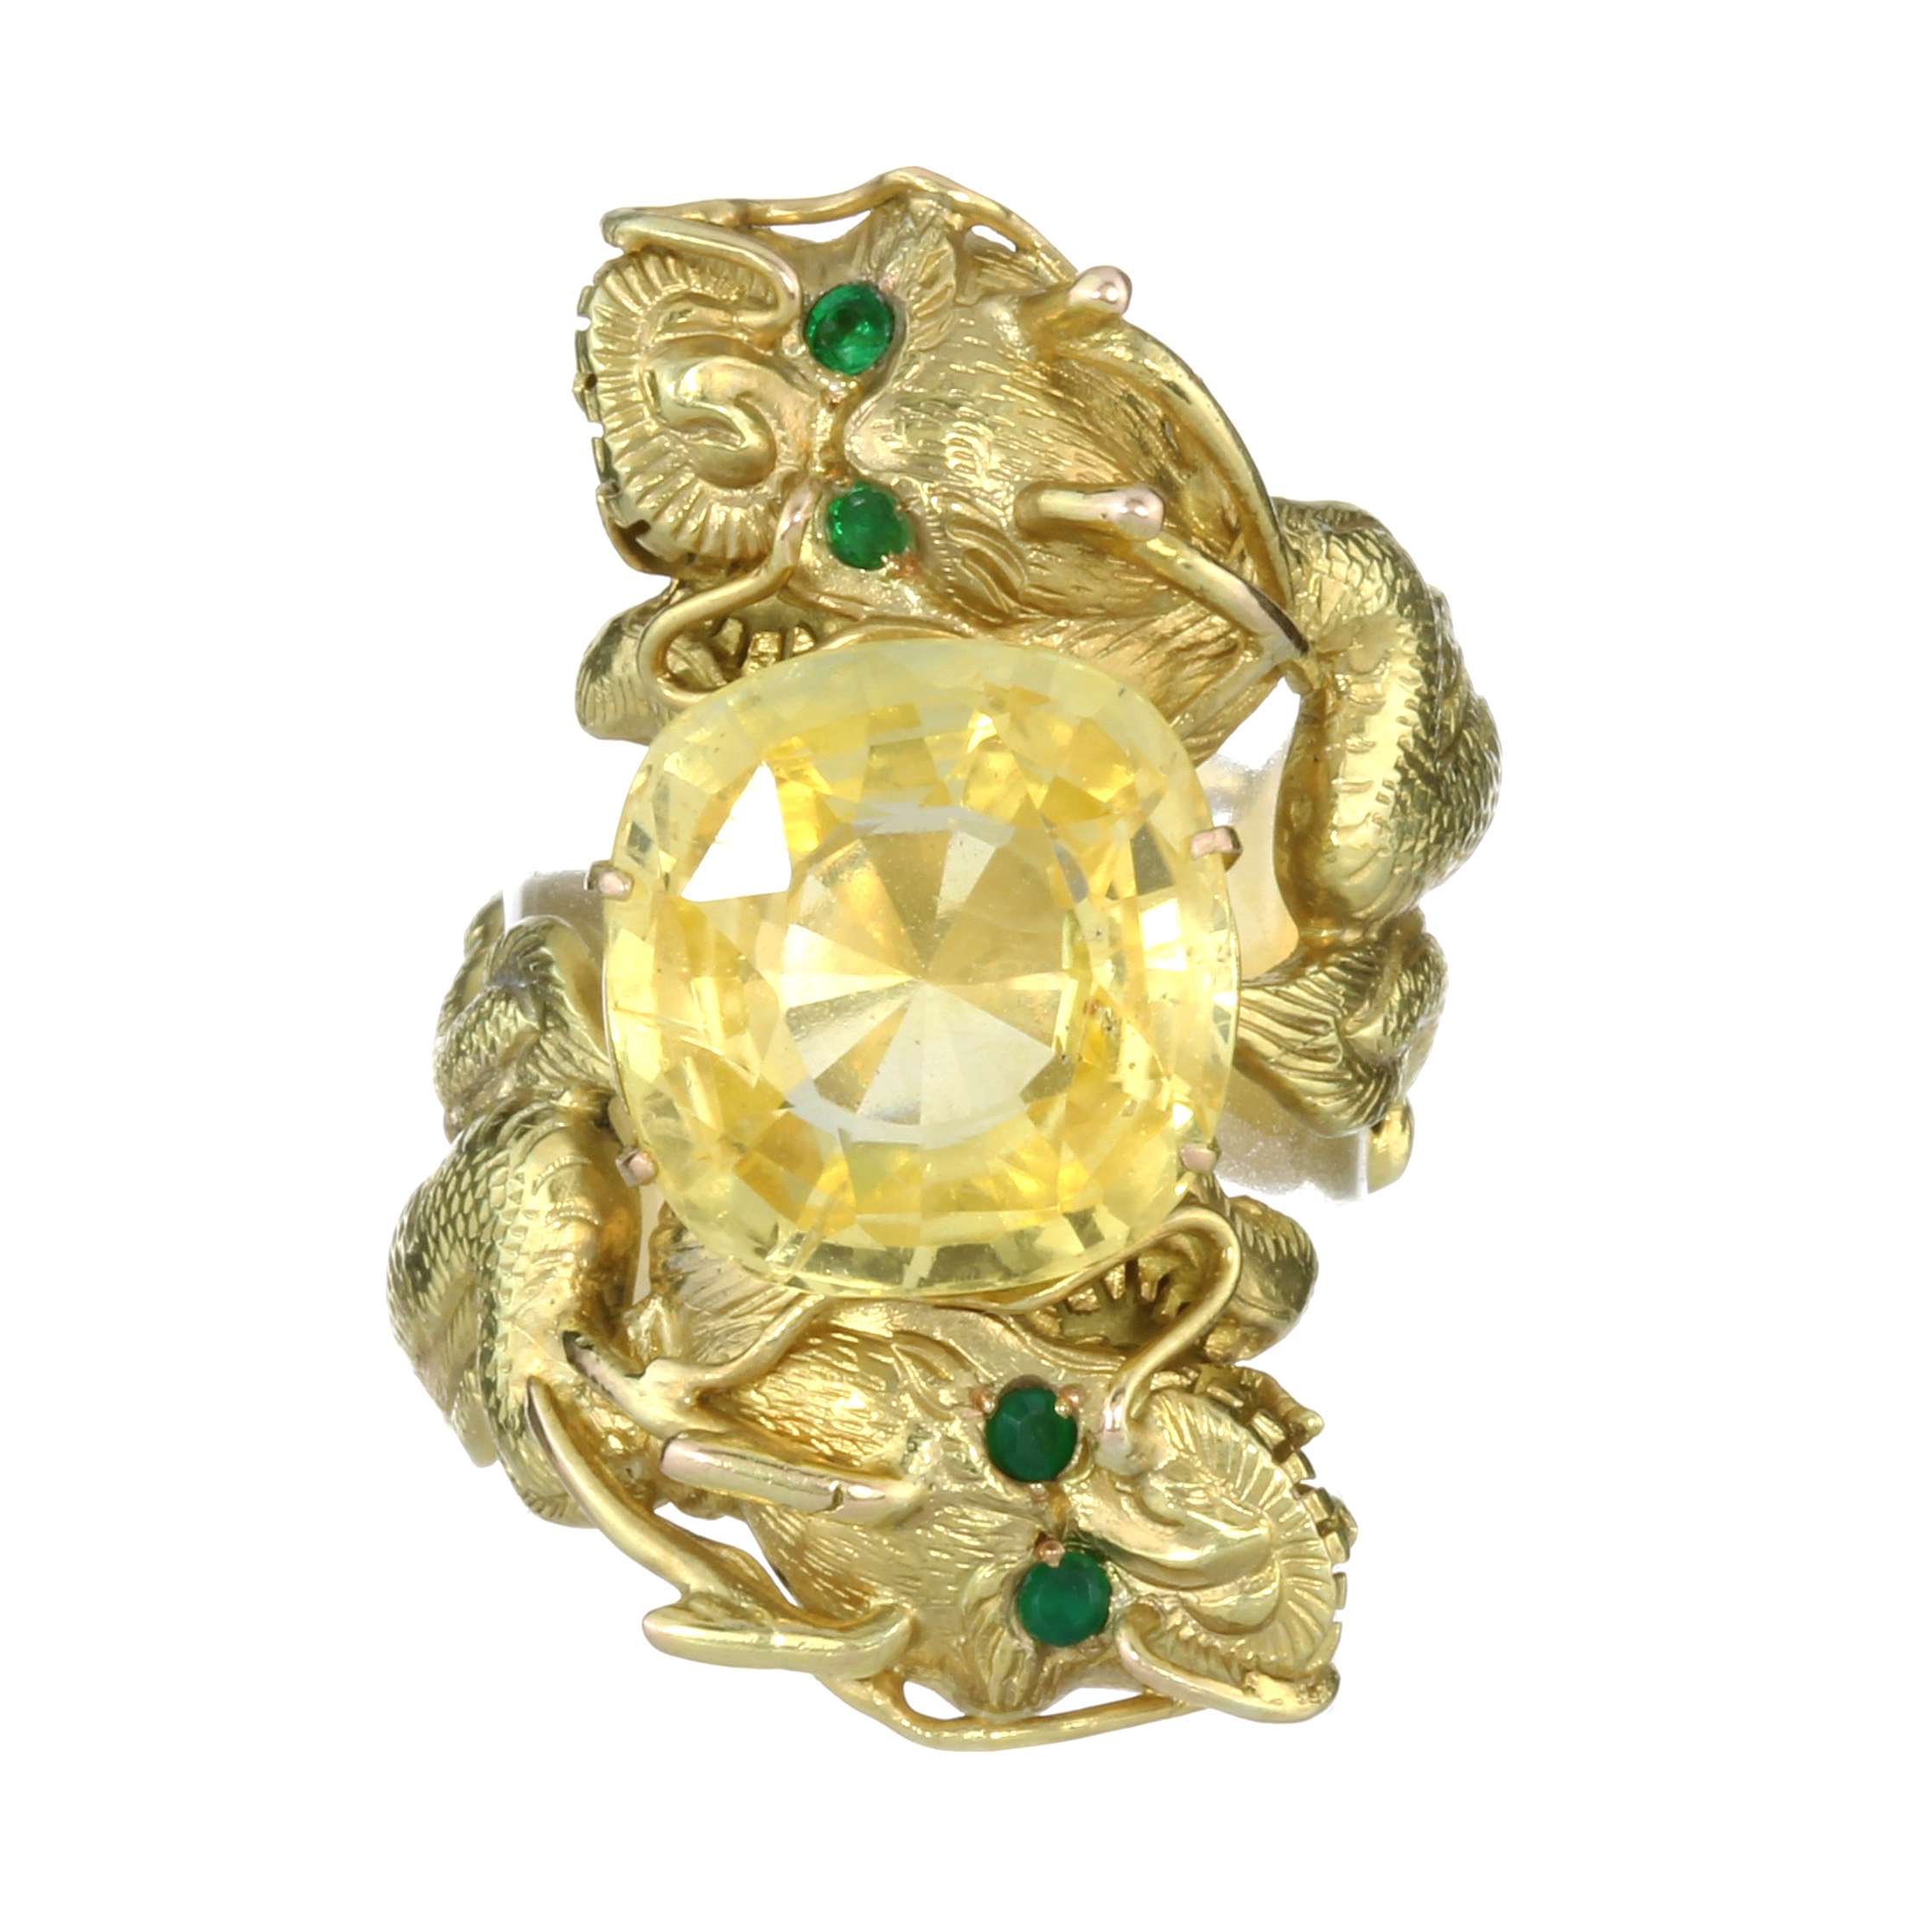 A 10.84 CARAT CEYLON NO HEAT YELLOW SAPPHIRE CHINESE DRAGON RING in yellow gold designed as two